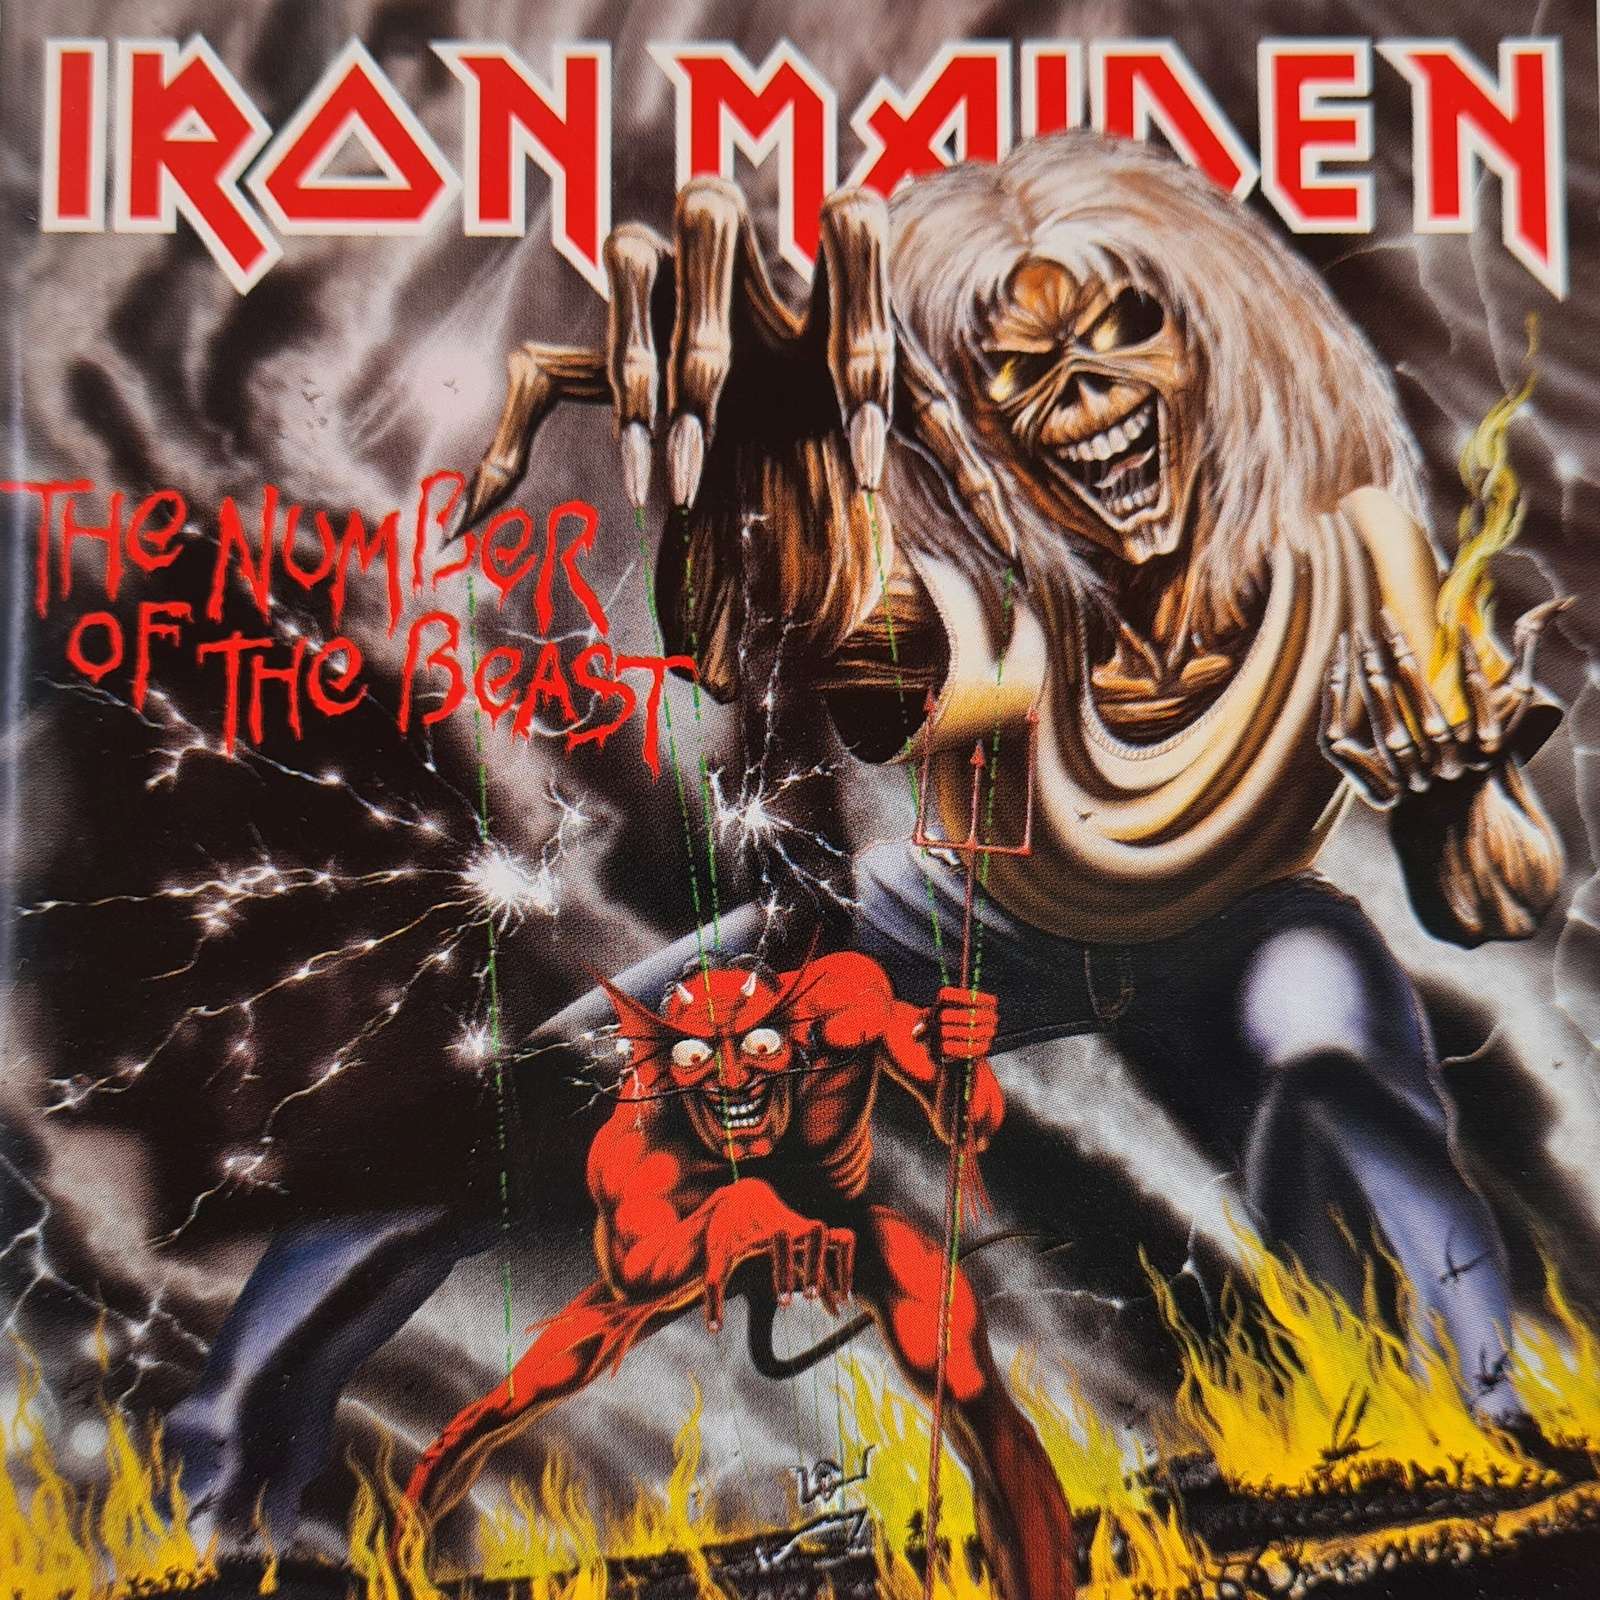 Iron Maiden - The Number of the Beast (CD) Enhanced